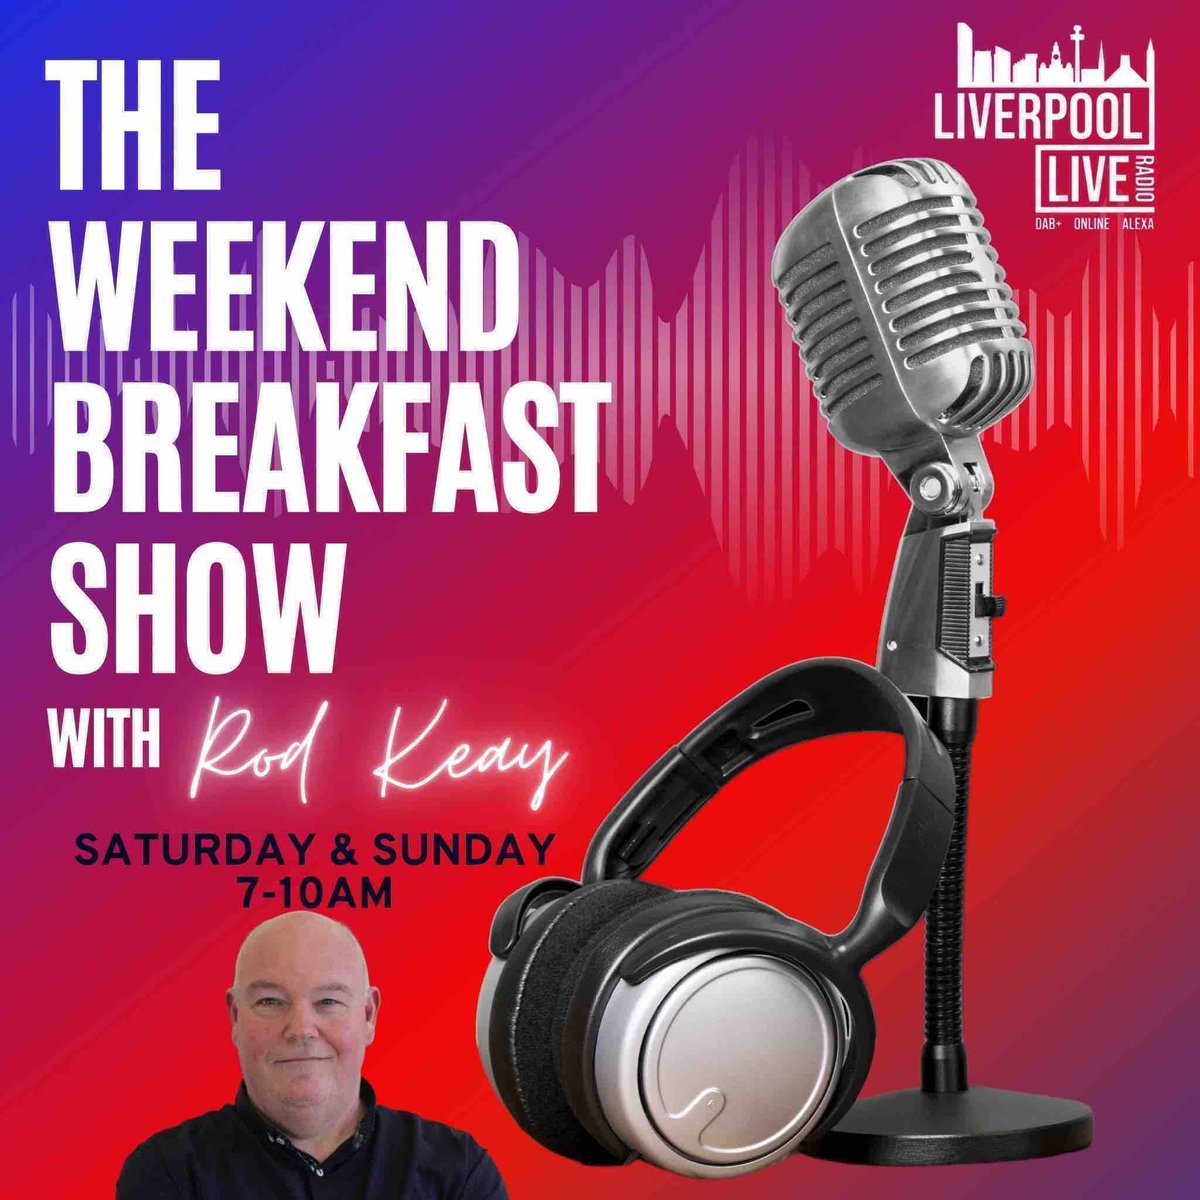 The Breakfast show ……Rod Keay is here to brighten up your Sunday Morning! DAB+ • SMART SPEAKER • ONLINE • FREEVIEW CH 277